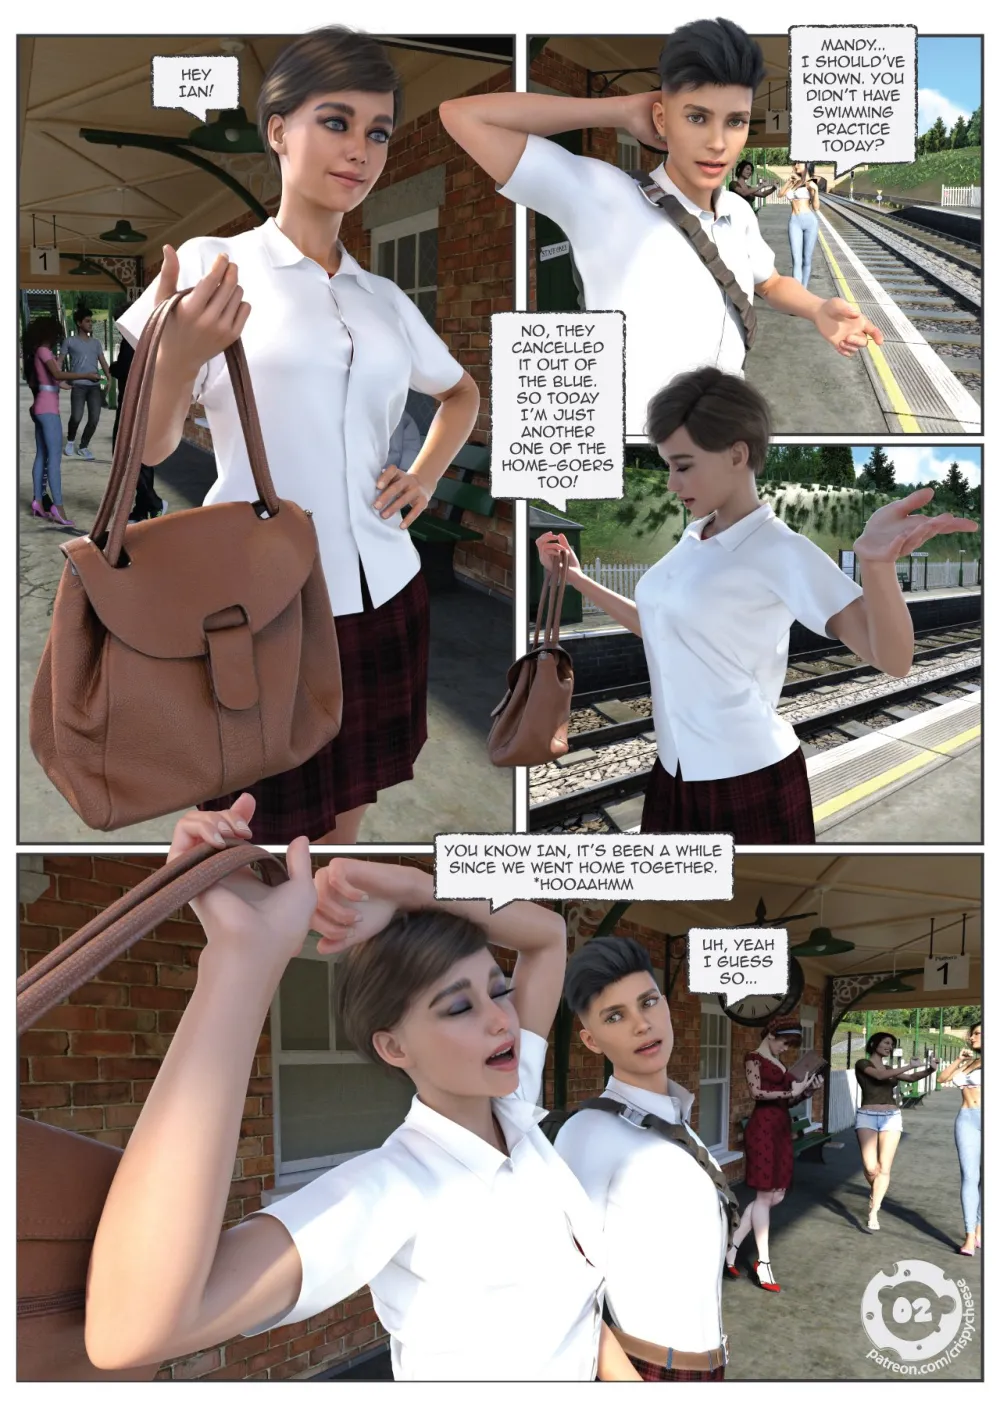 When Girl Meets Boy- CrispyCheese - Page 3